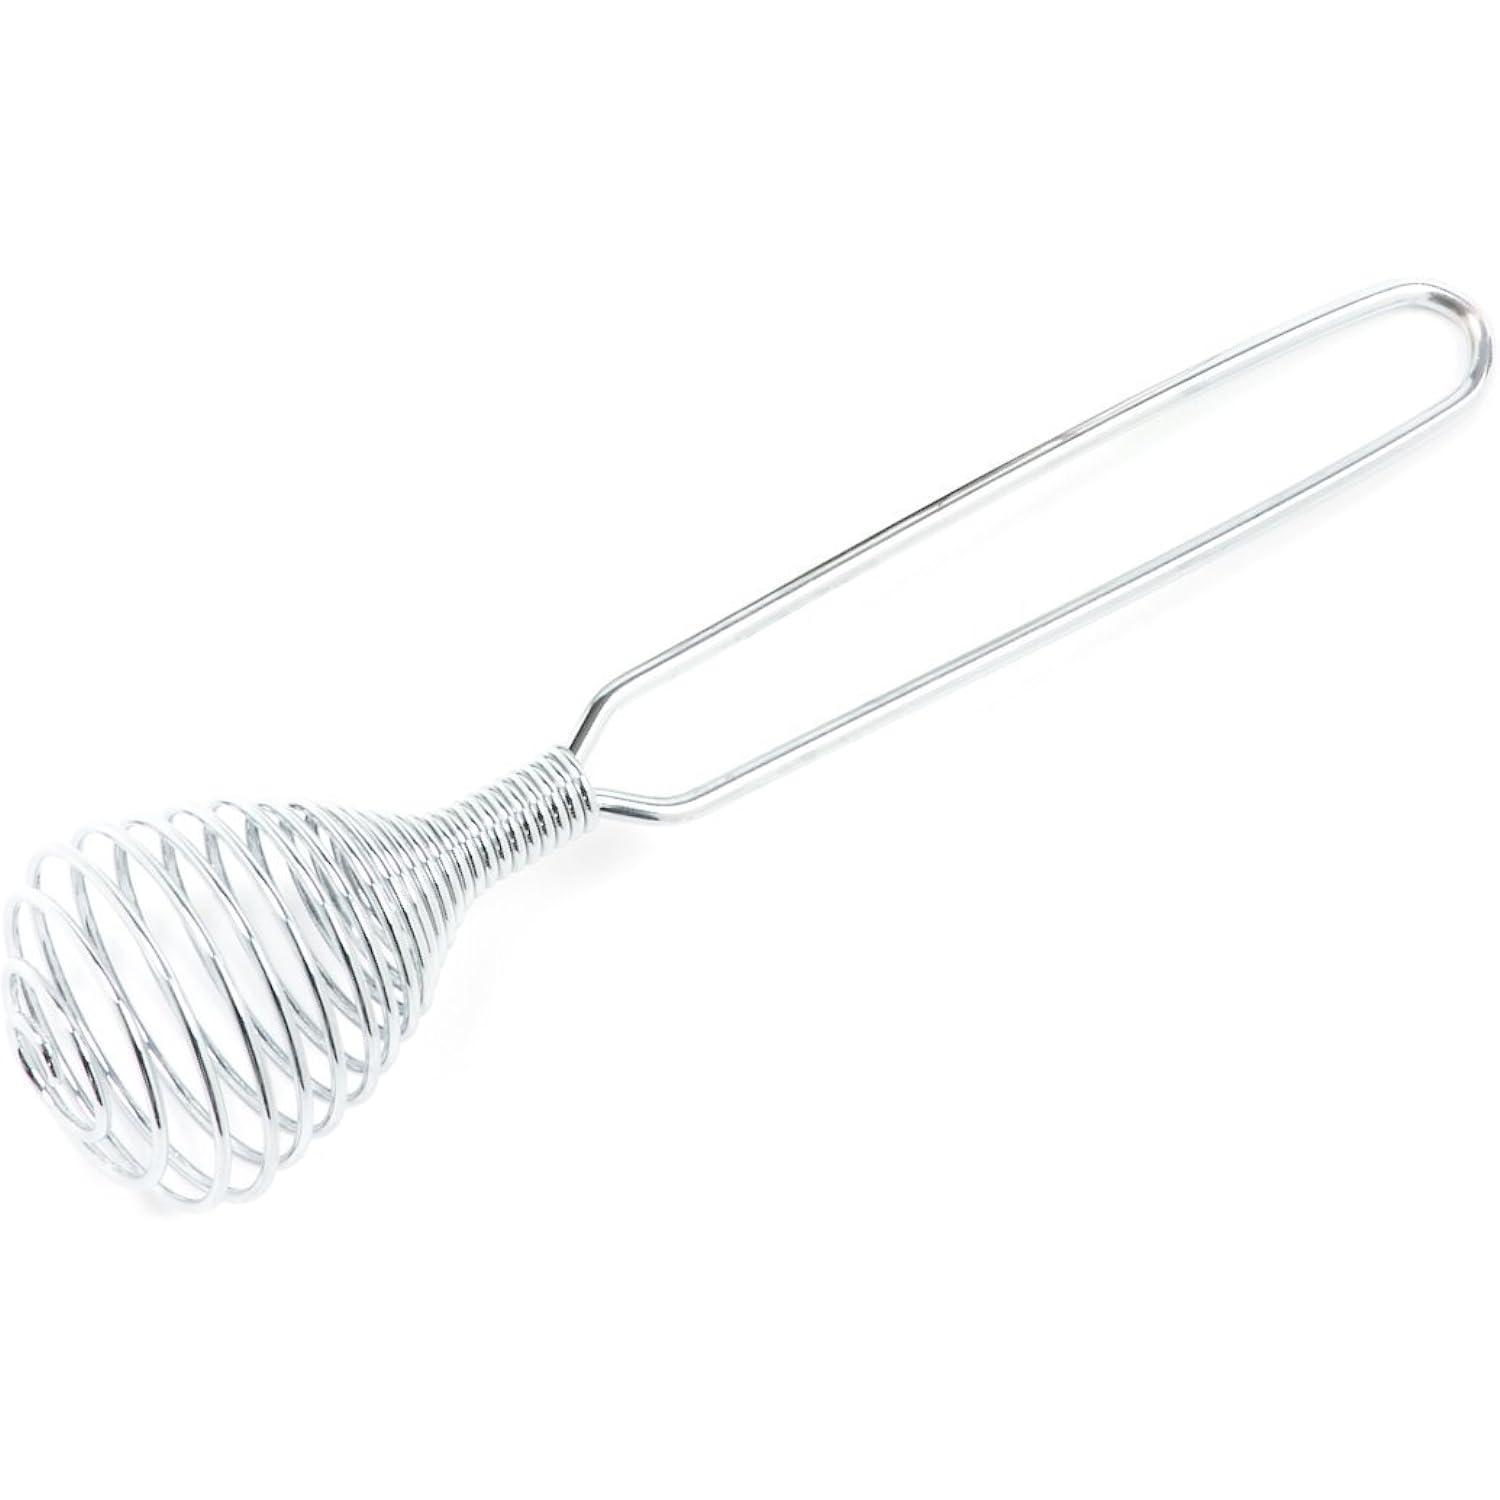 NorPro 7-Inch Mini Whisk, One Size, As Shown